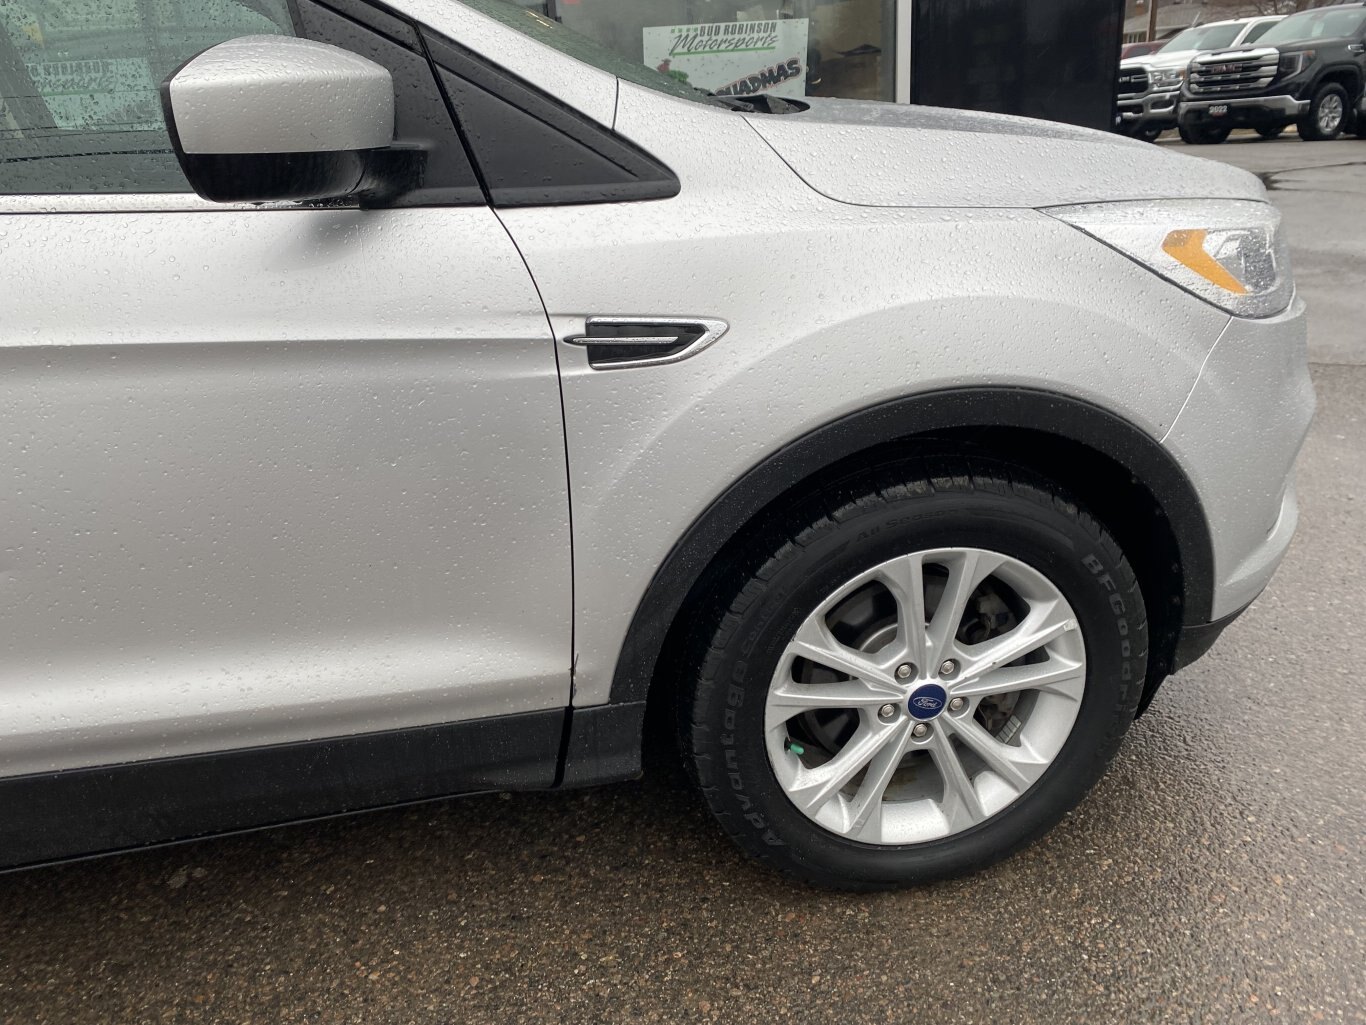 2018 FORD ESCAPE SEL AWD LEATHER SEATS, SUNROOF, HEATED SEATS, REAR VIEW CAMERA AND NAVIGATION!!